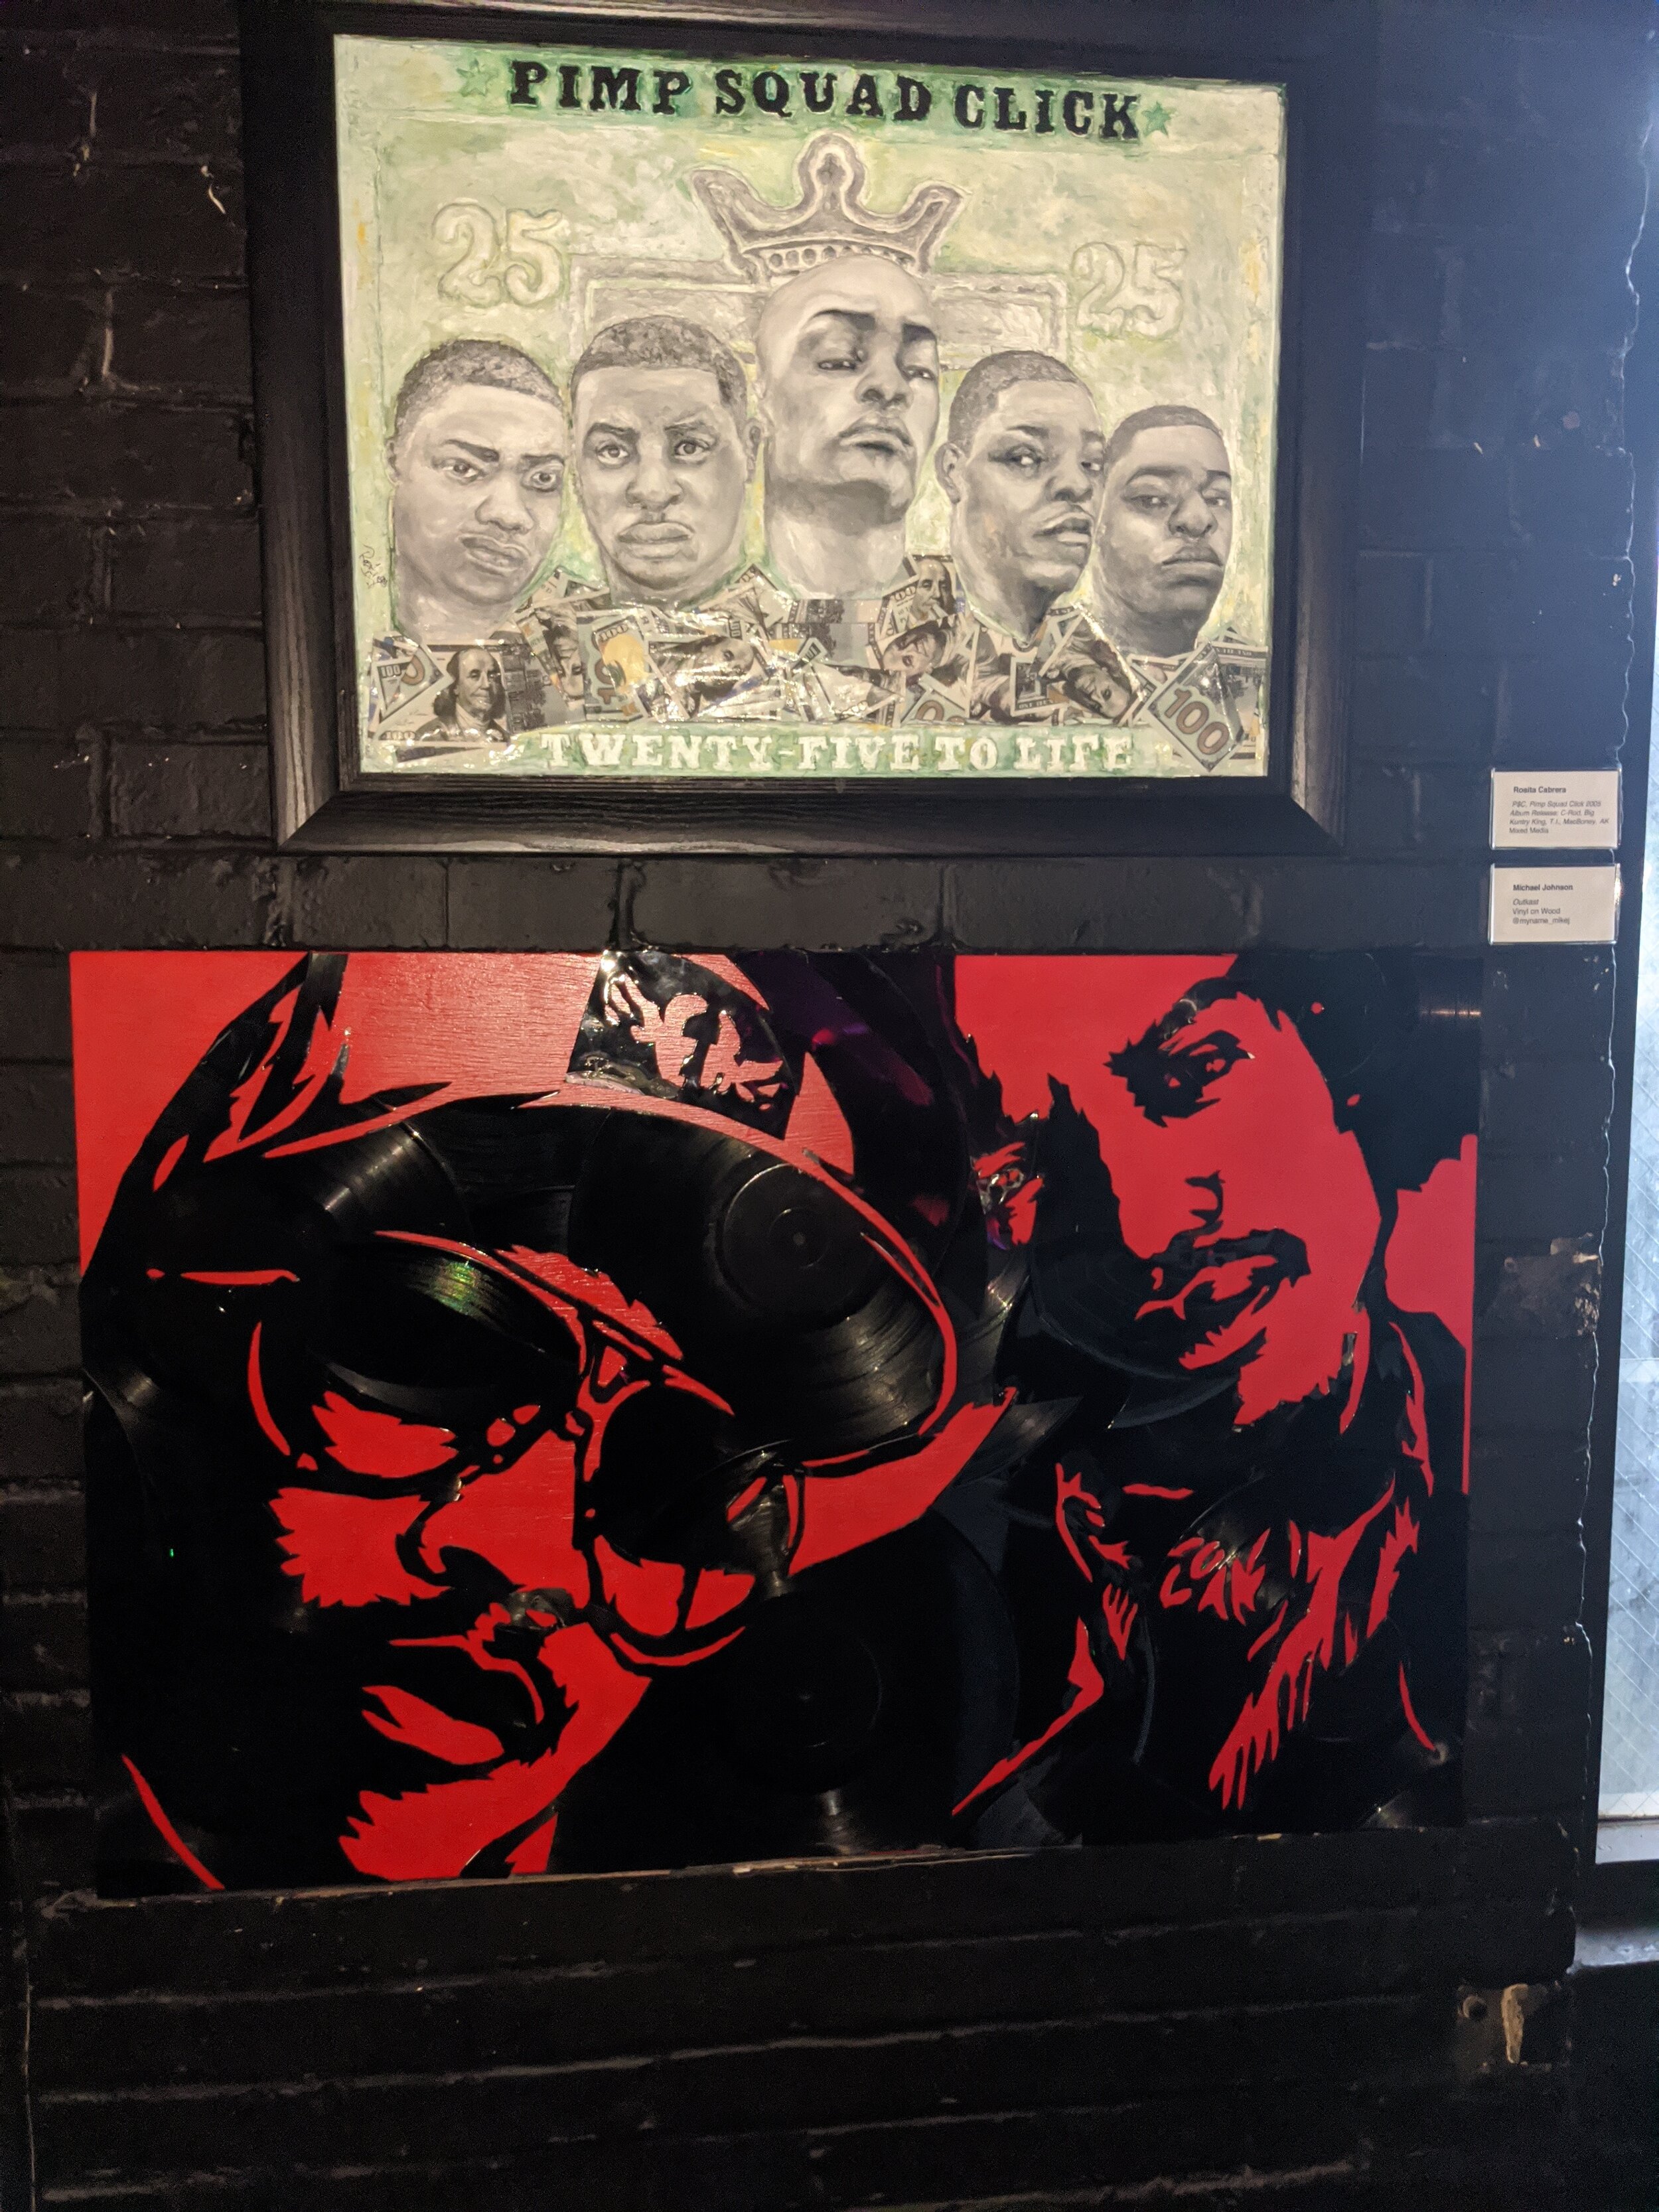 P$C by Rosita Cabrere (top) Outkast by Michal Johnson (bottom)